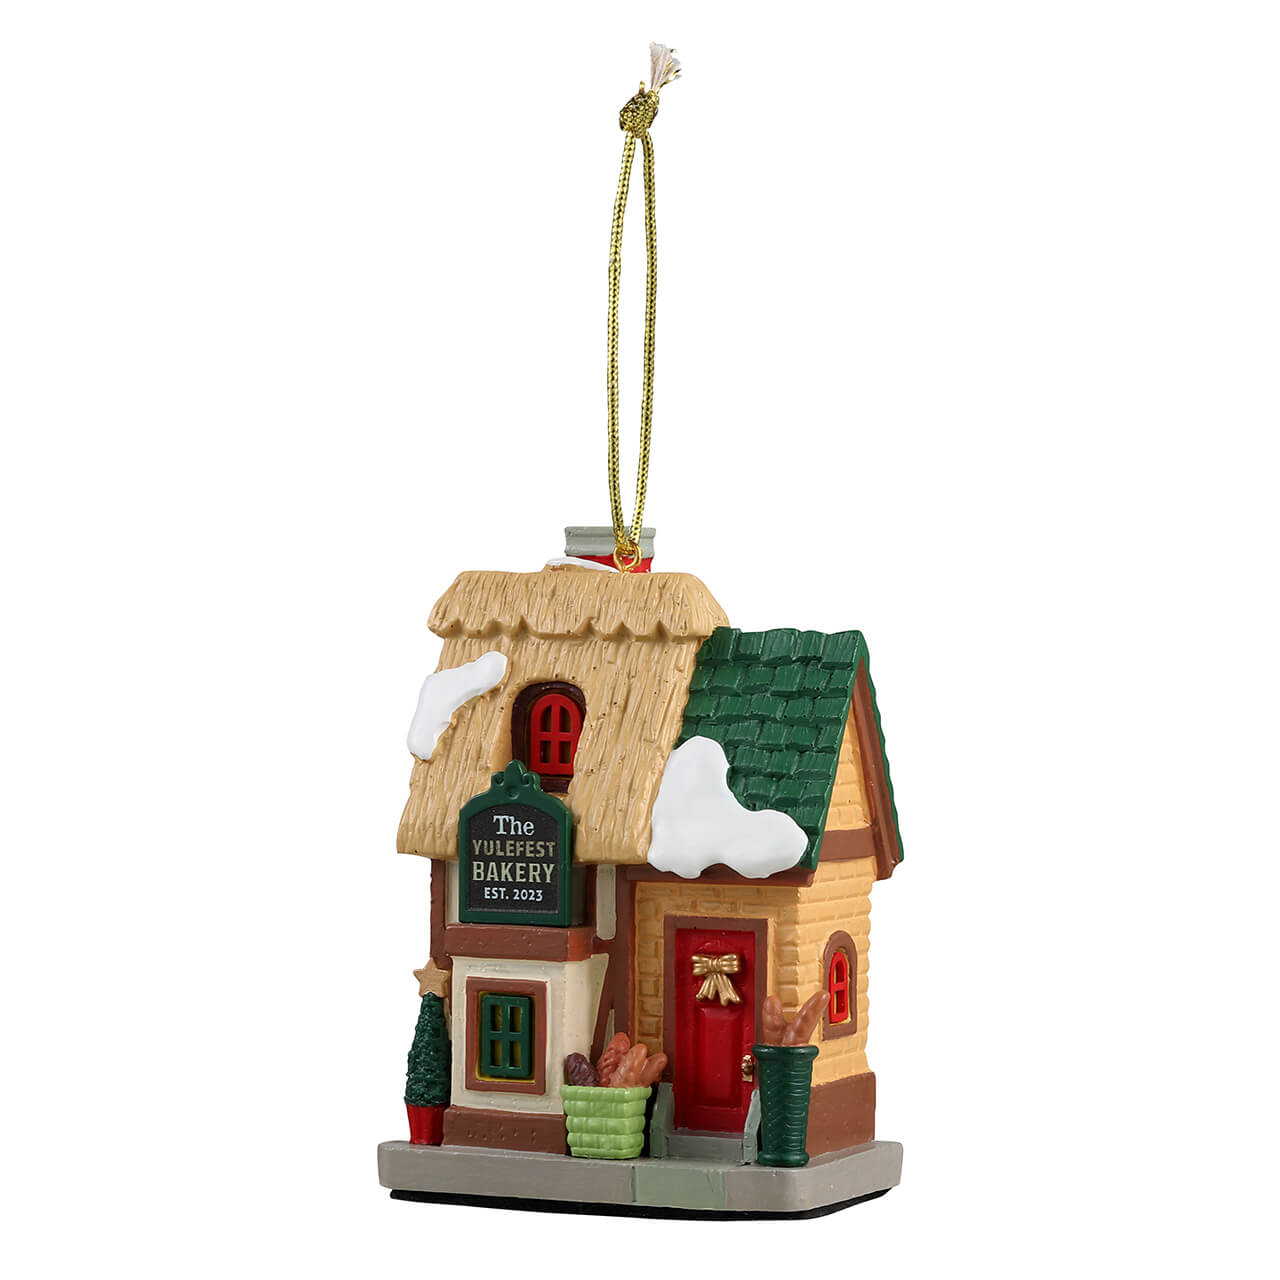 Lemax 34161 The Yulefest Bakery Ornament